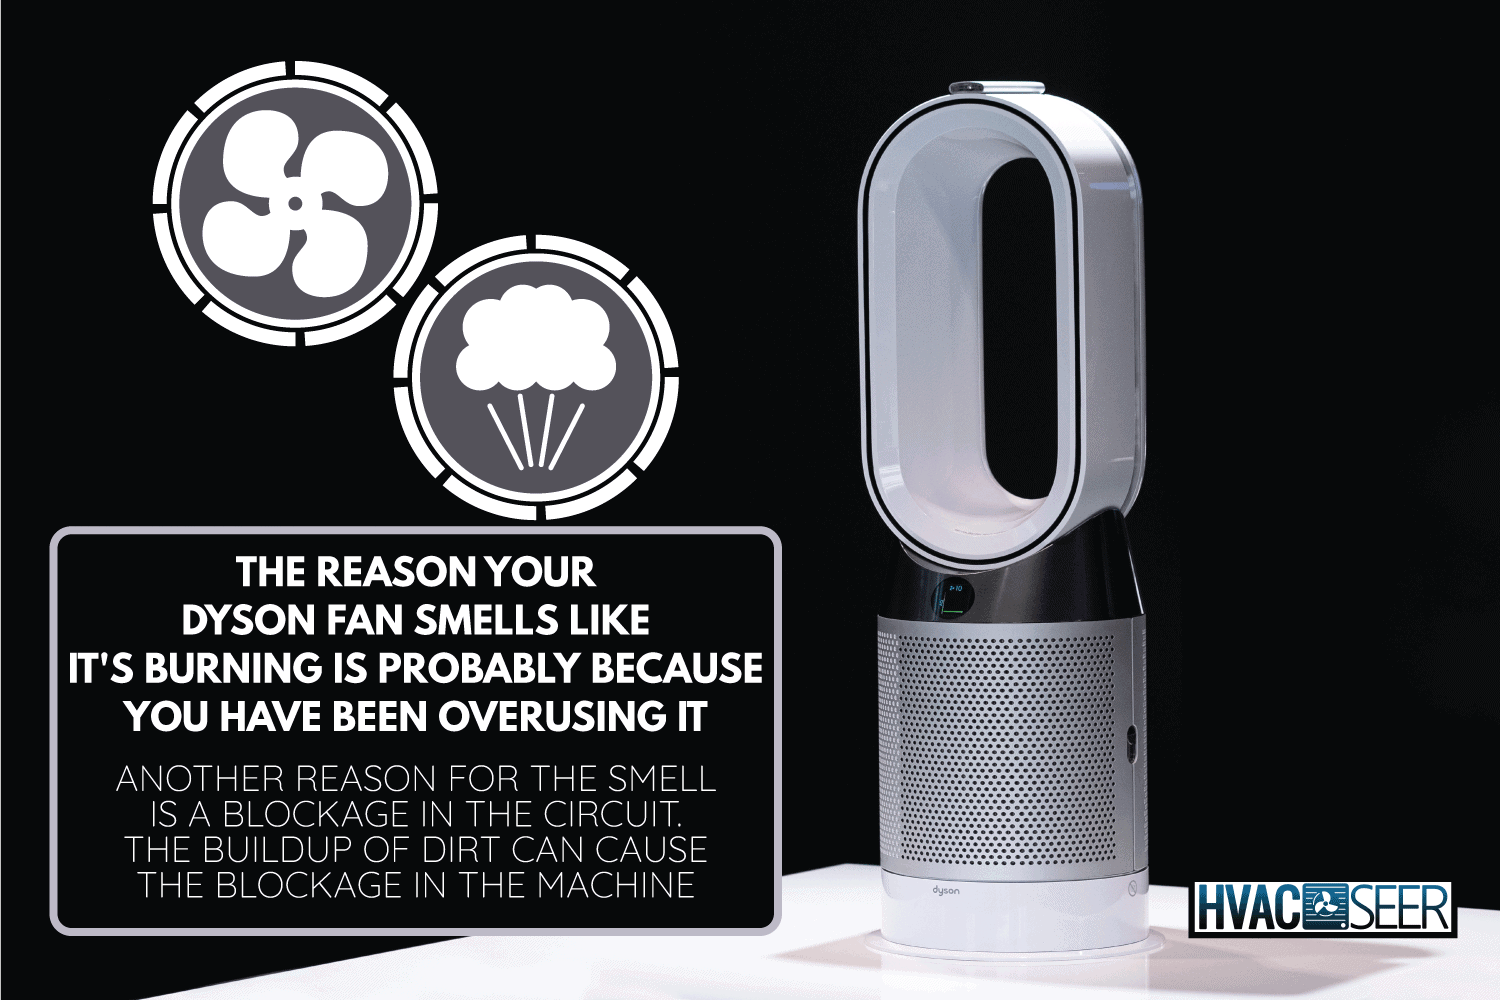 Showroom Brand Store Dyson. Modern Home Appliances. Dyson Fan Has A Burning Smell - Why And What To Do